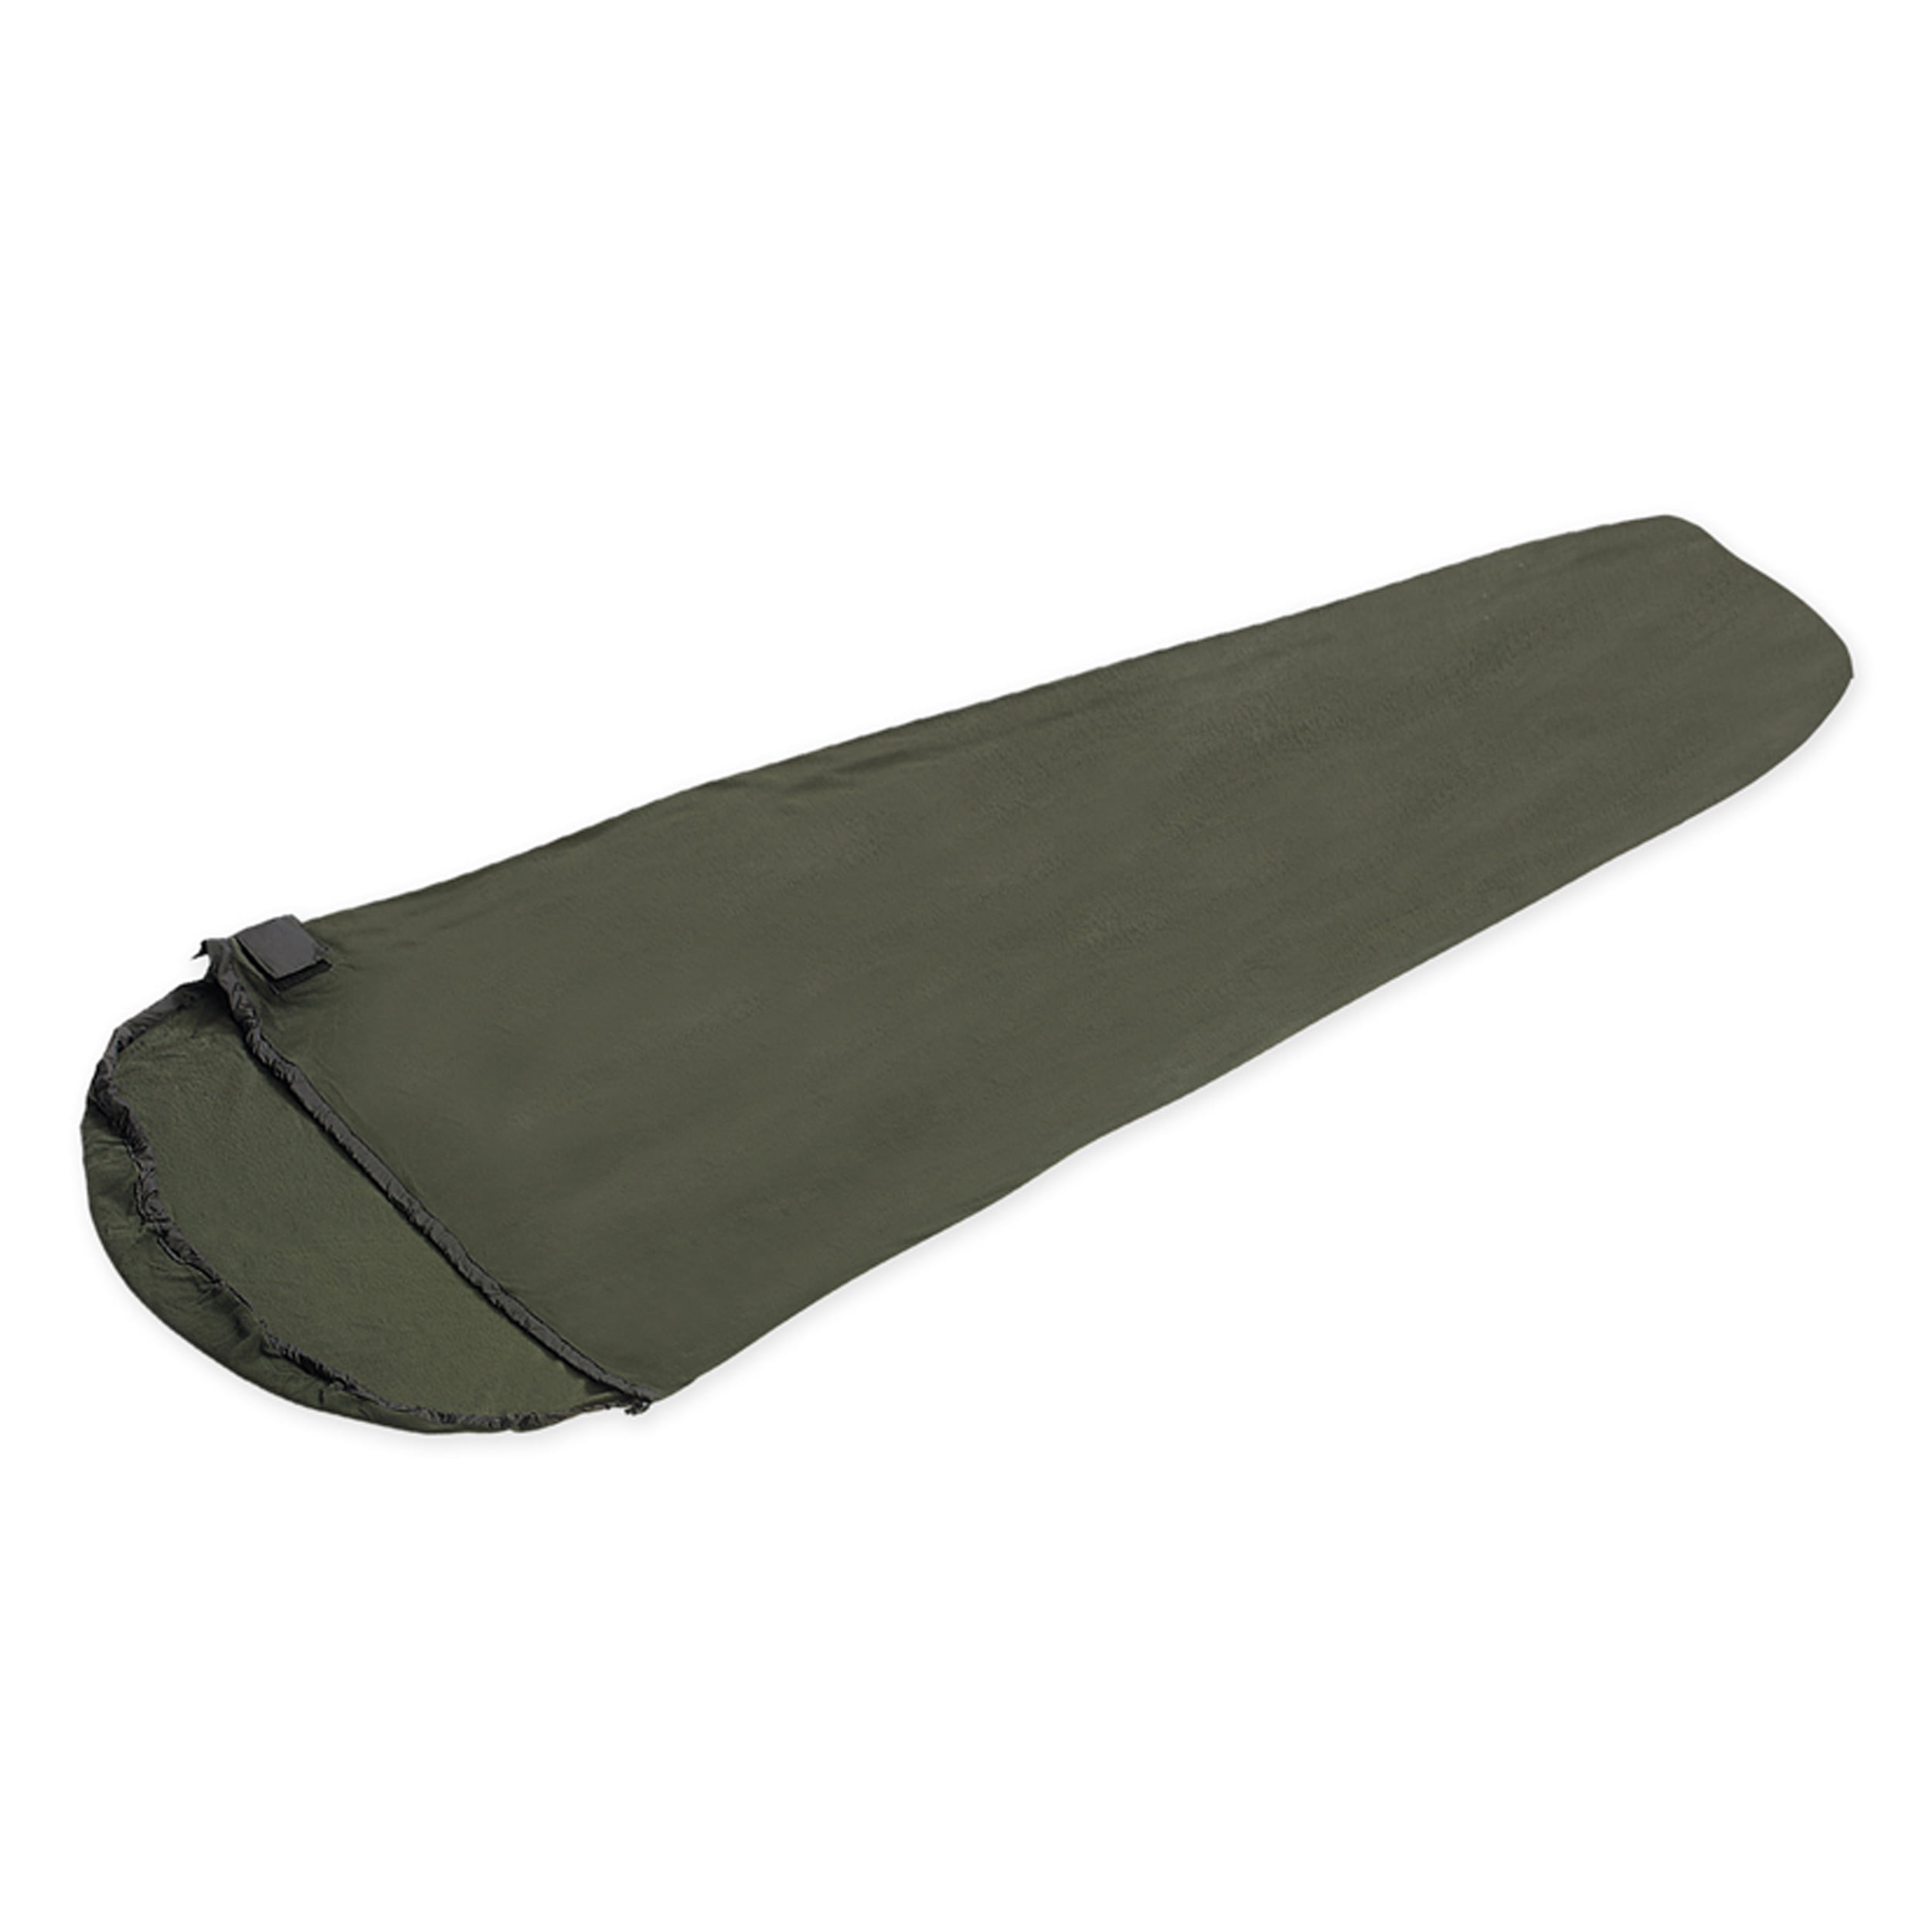 Alps Mountaineering Sleeping Bag Liner Mummy Poly Cotton Gray 32x86 4900013 for sale online